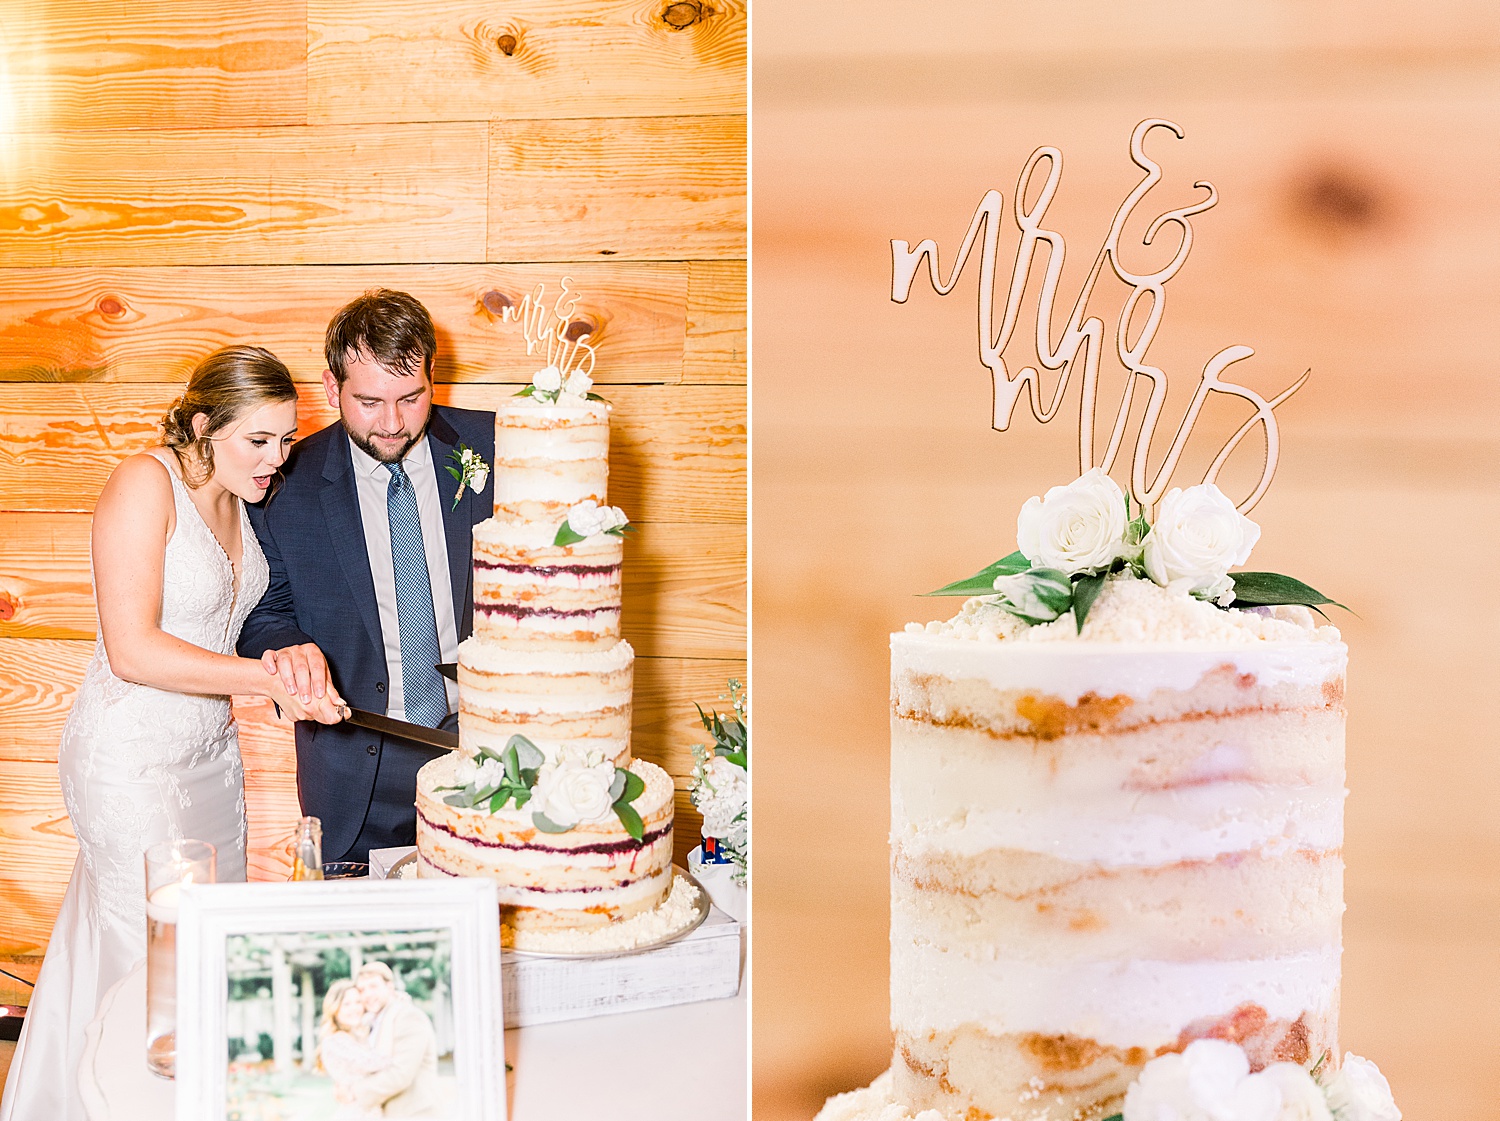 wedding cake from Belle Farms Summer Wedding in Alabama by Chelsea Morton Photography